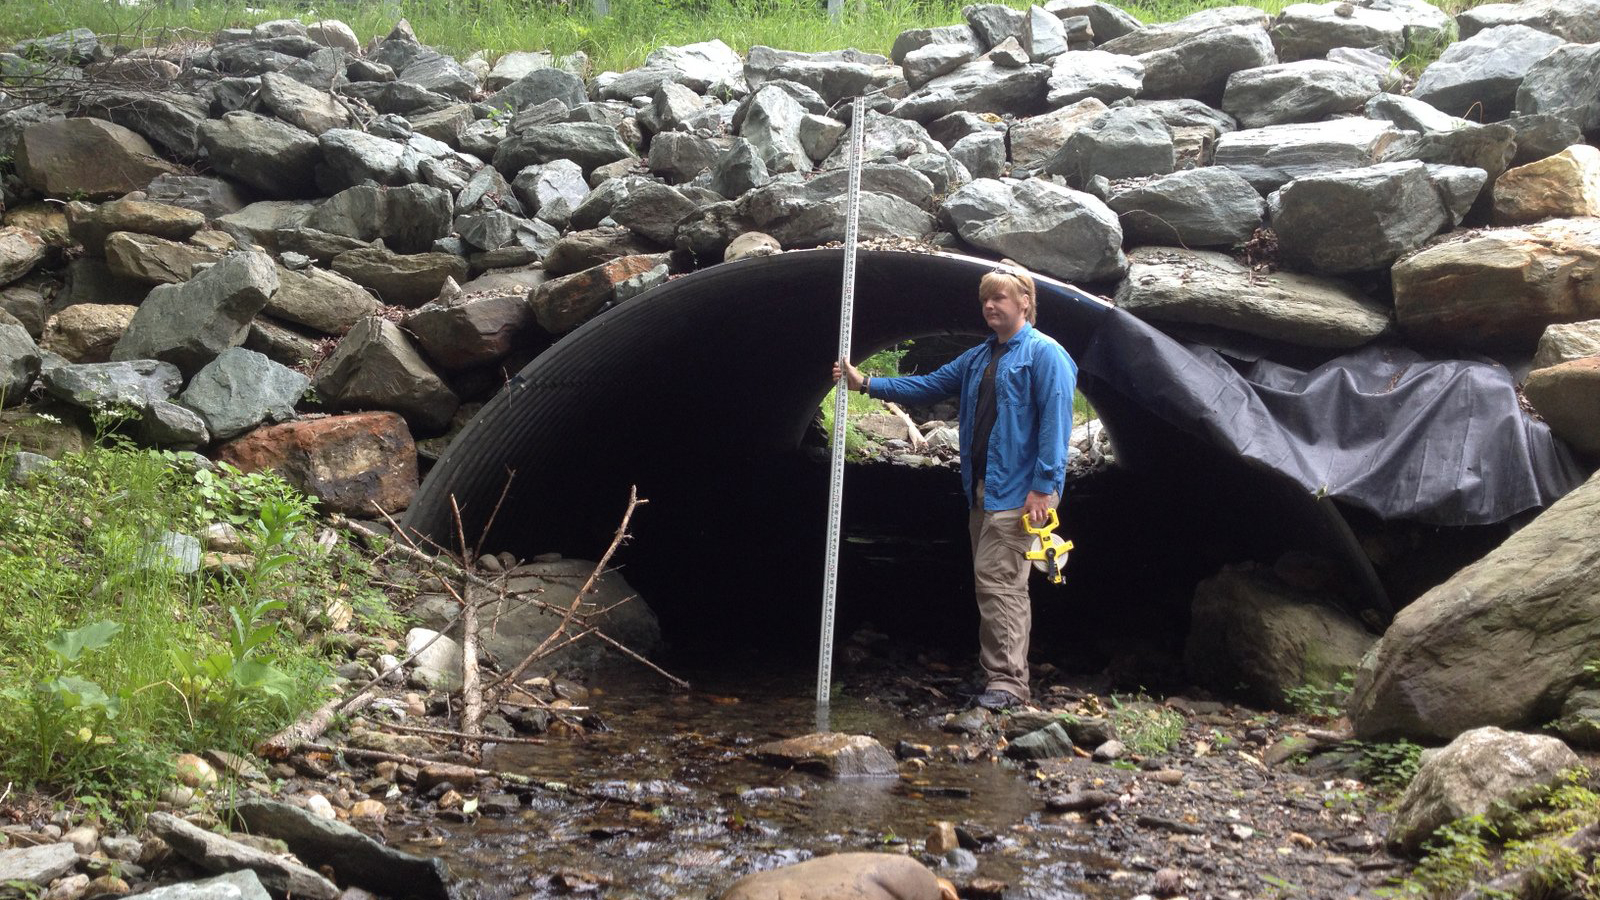 This culvert was built using a technique developed by the Forest Service called 